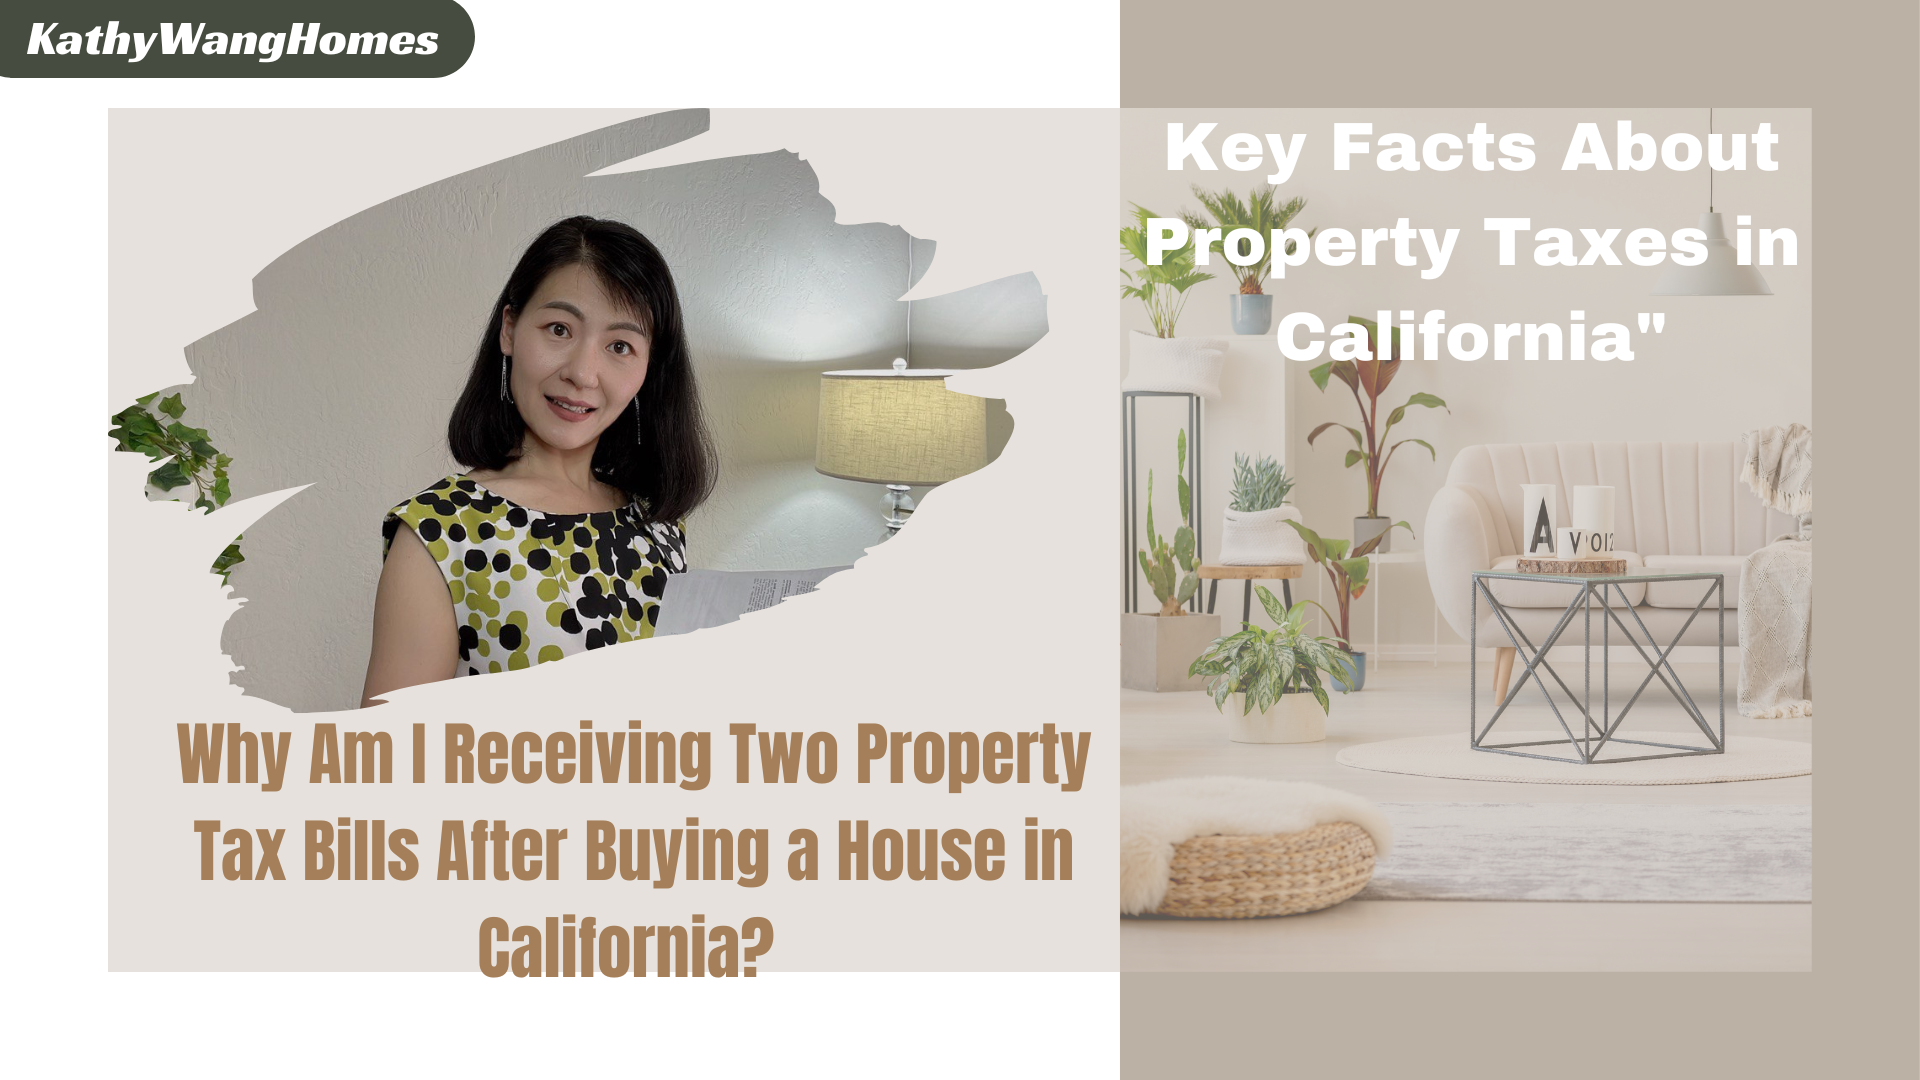 Key Facts About Property Taxes in California